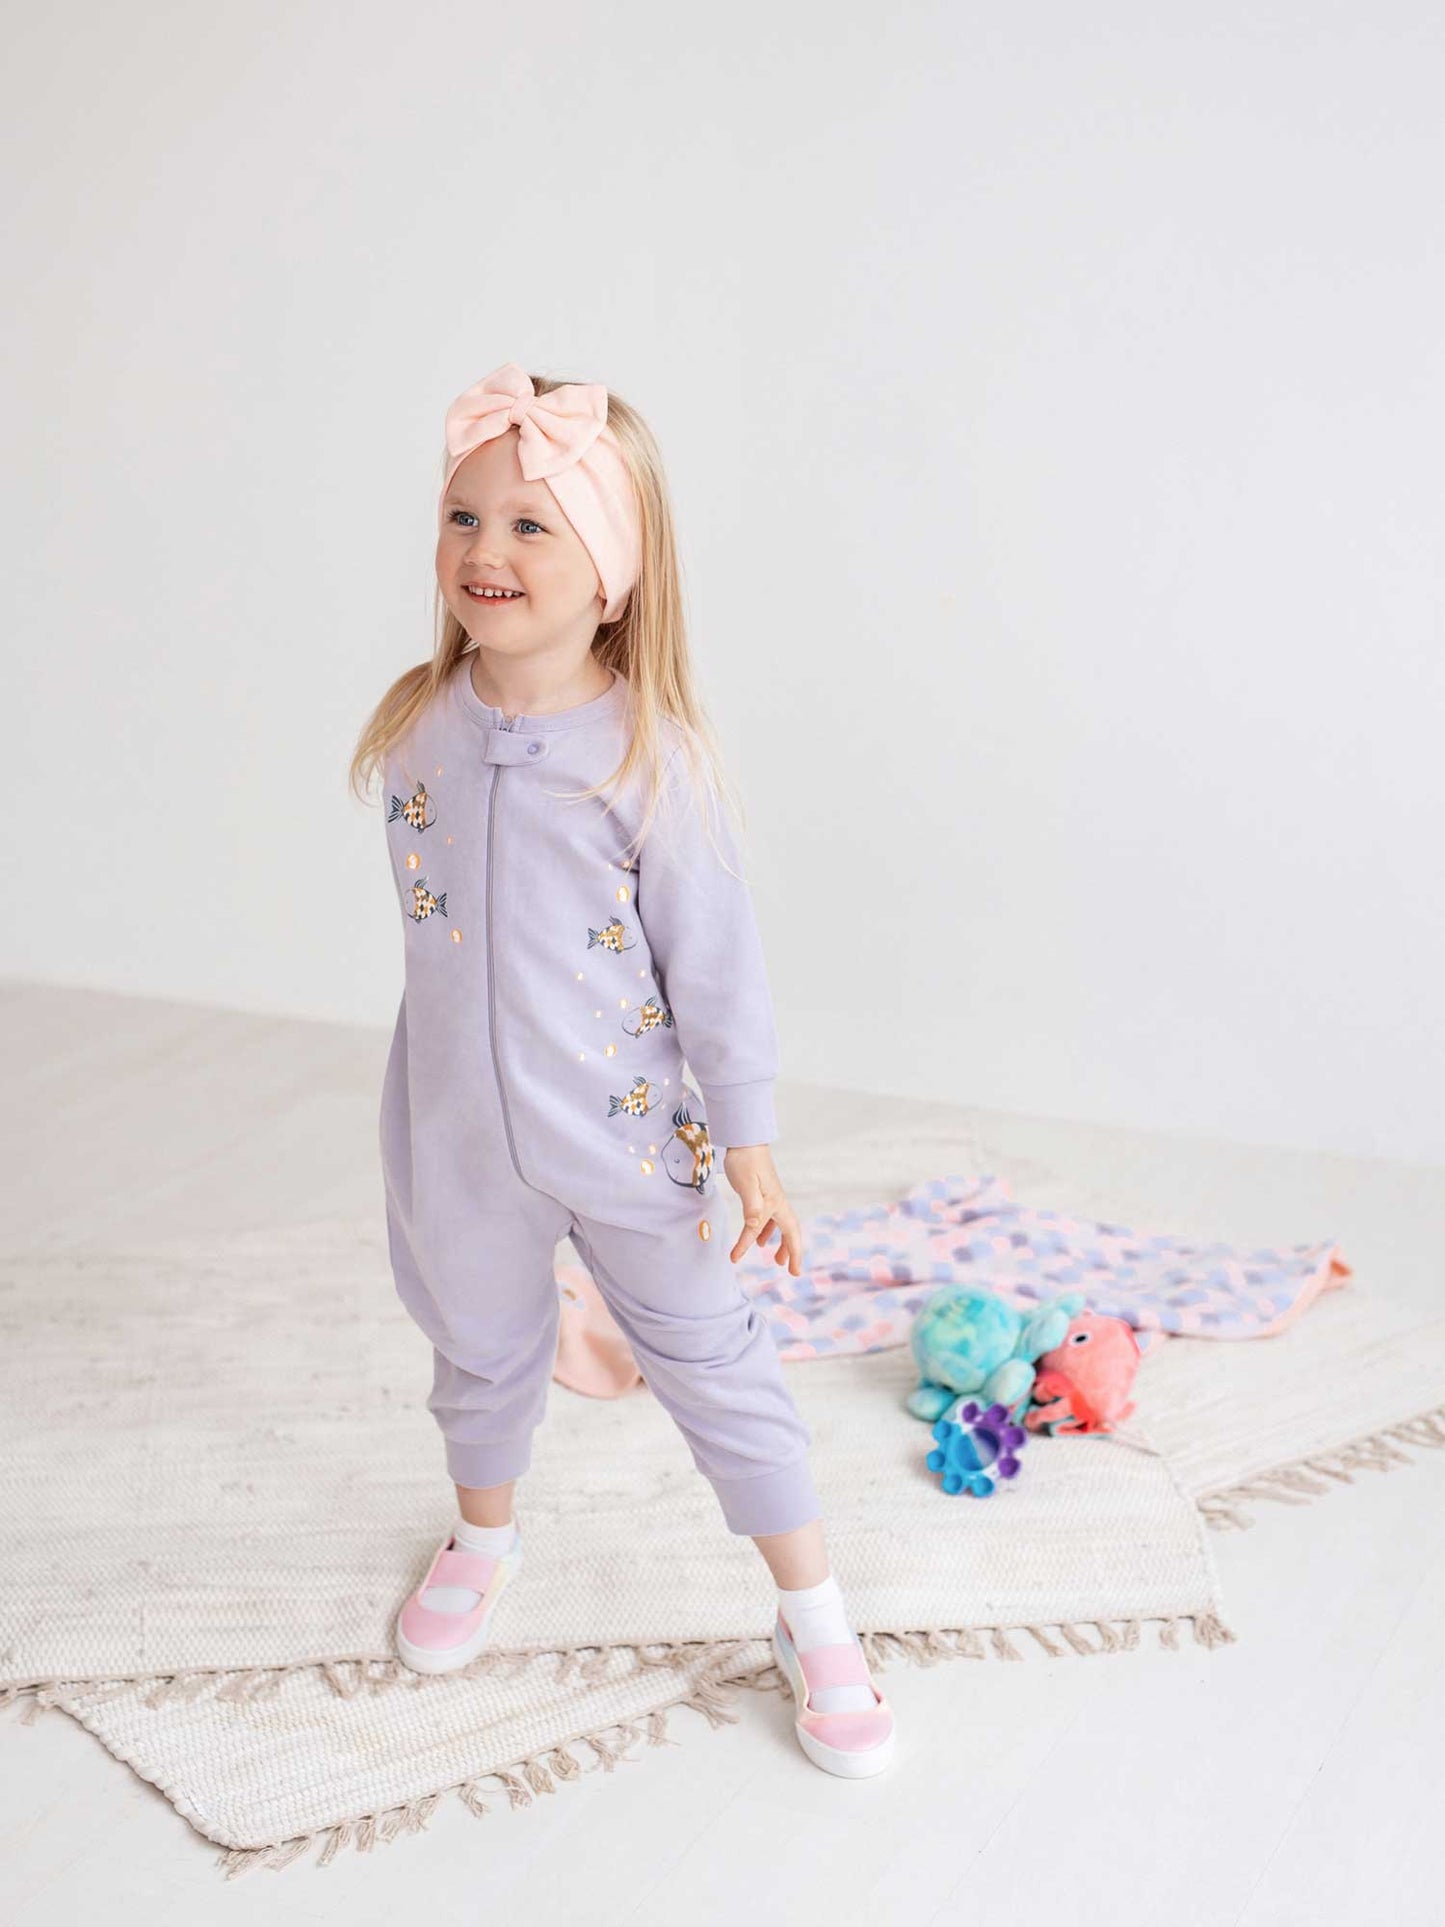 Baby Overall Gold Fish 310 is made with high-quality soft stockinet, has a zipper in the front which makes it easy to switch even while baby sleeps, and meets the Oeko-Tex Standard 100 making it safe for your little one.